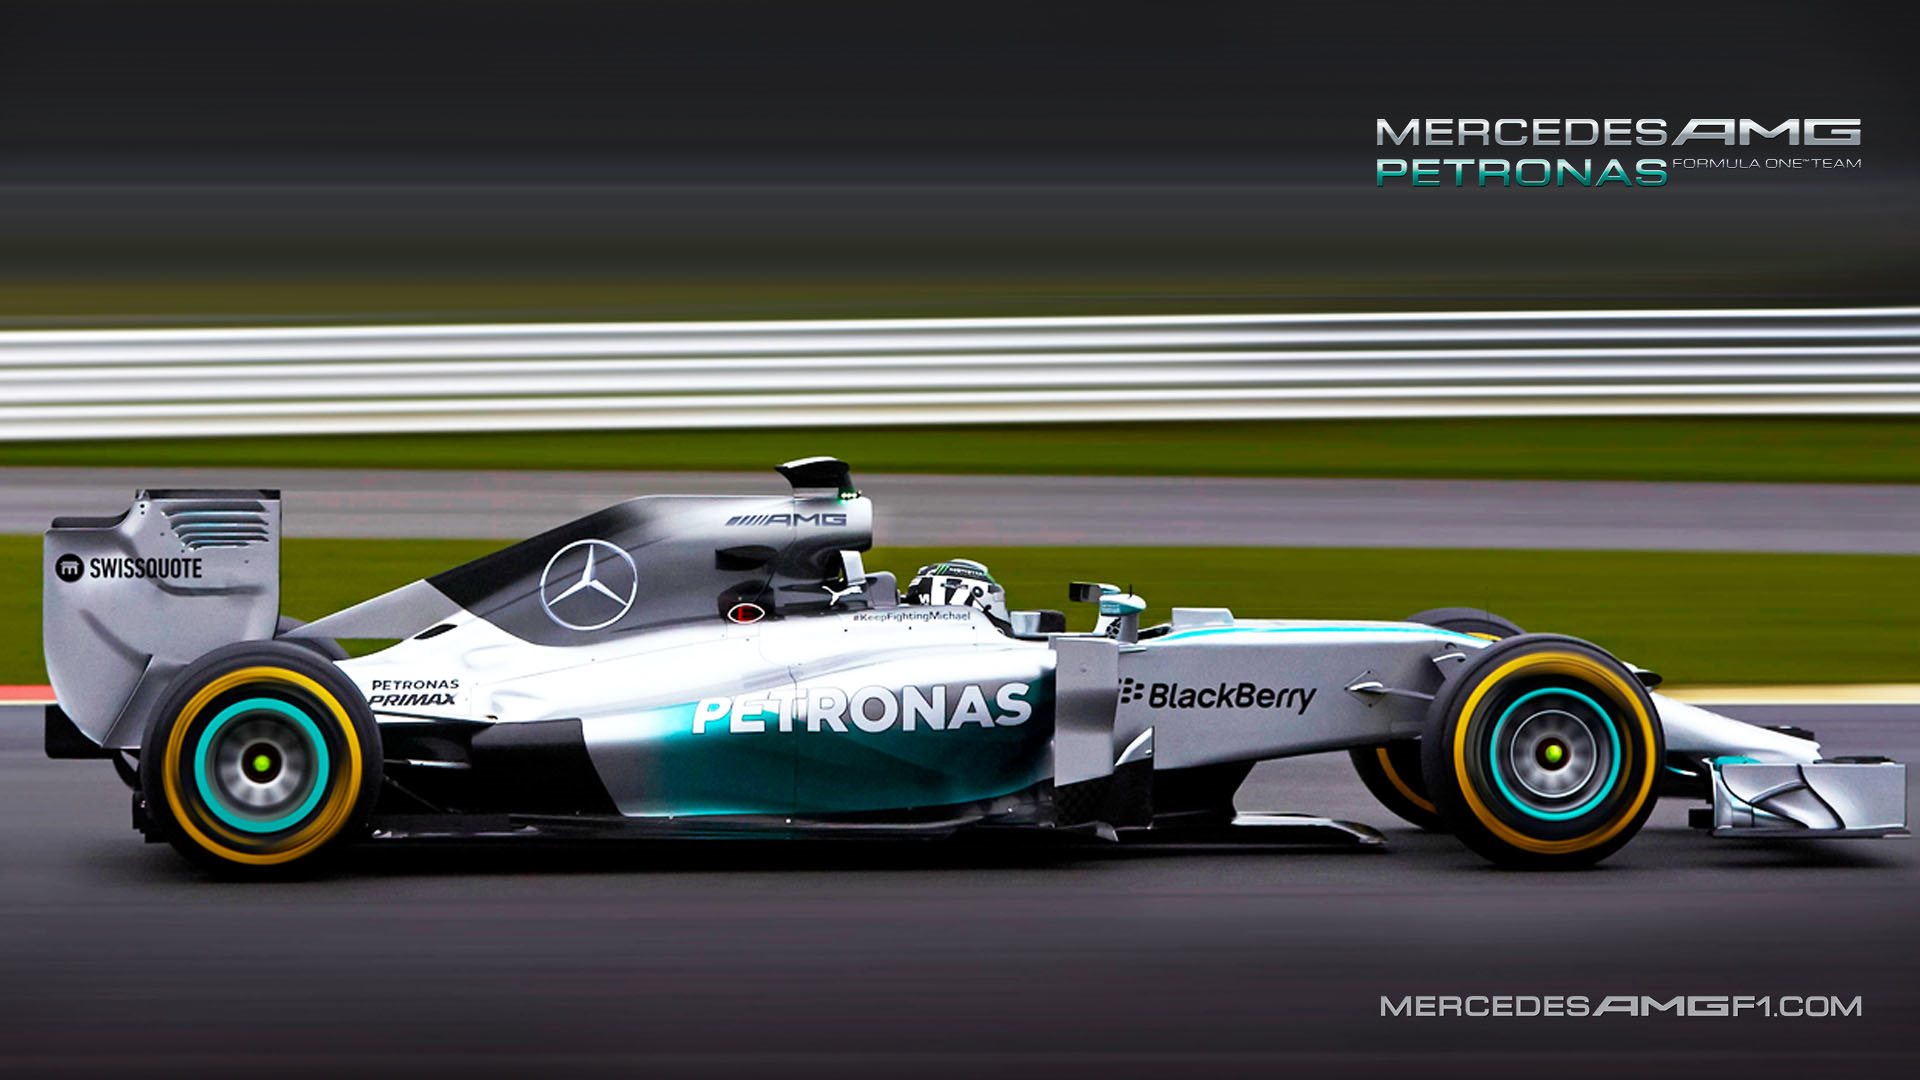 Mercedes AMG Petronas F1 Wallpapers HD Wallpapers